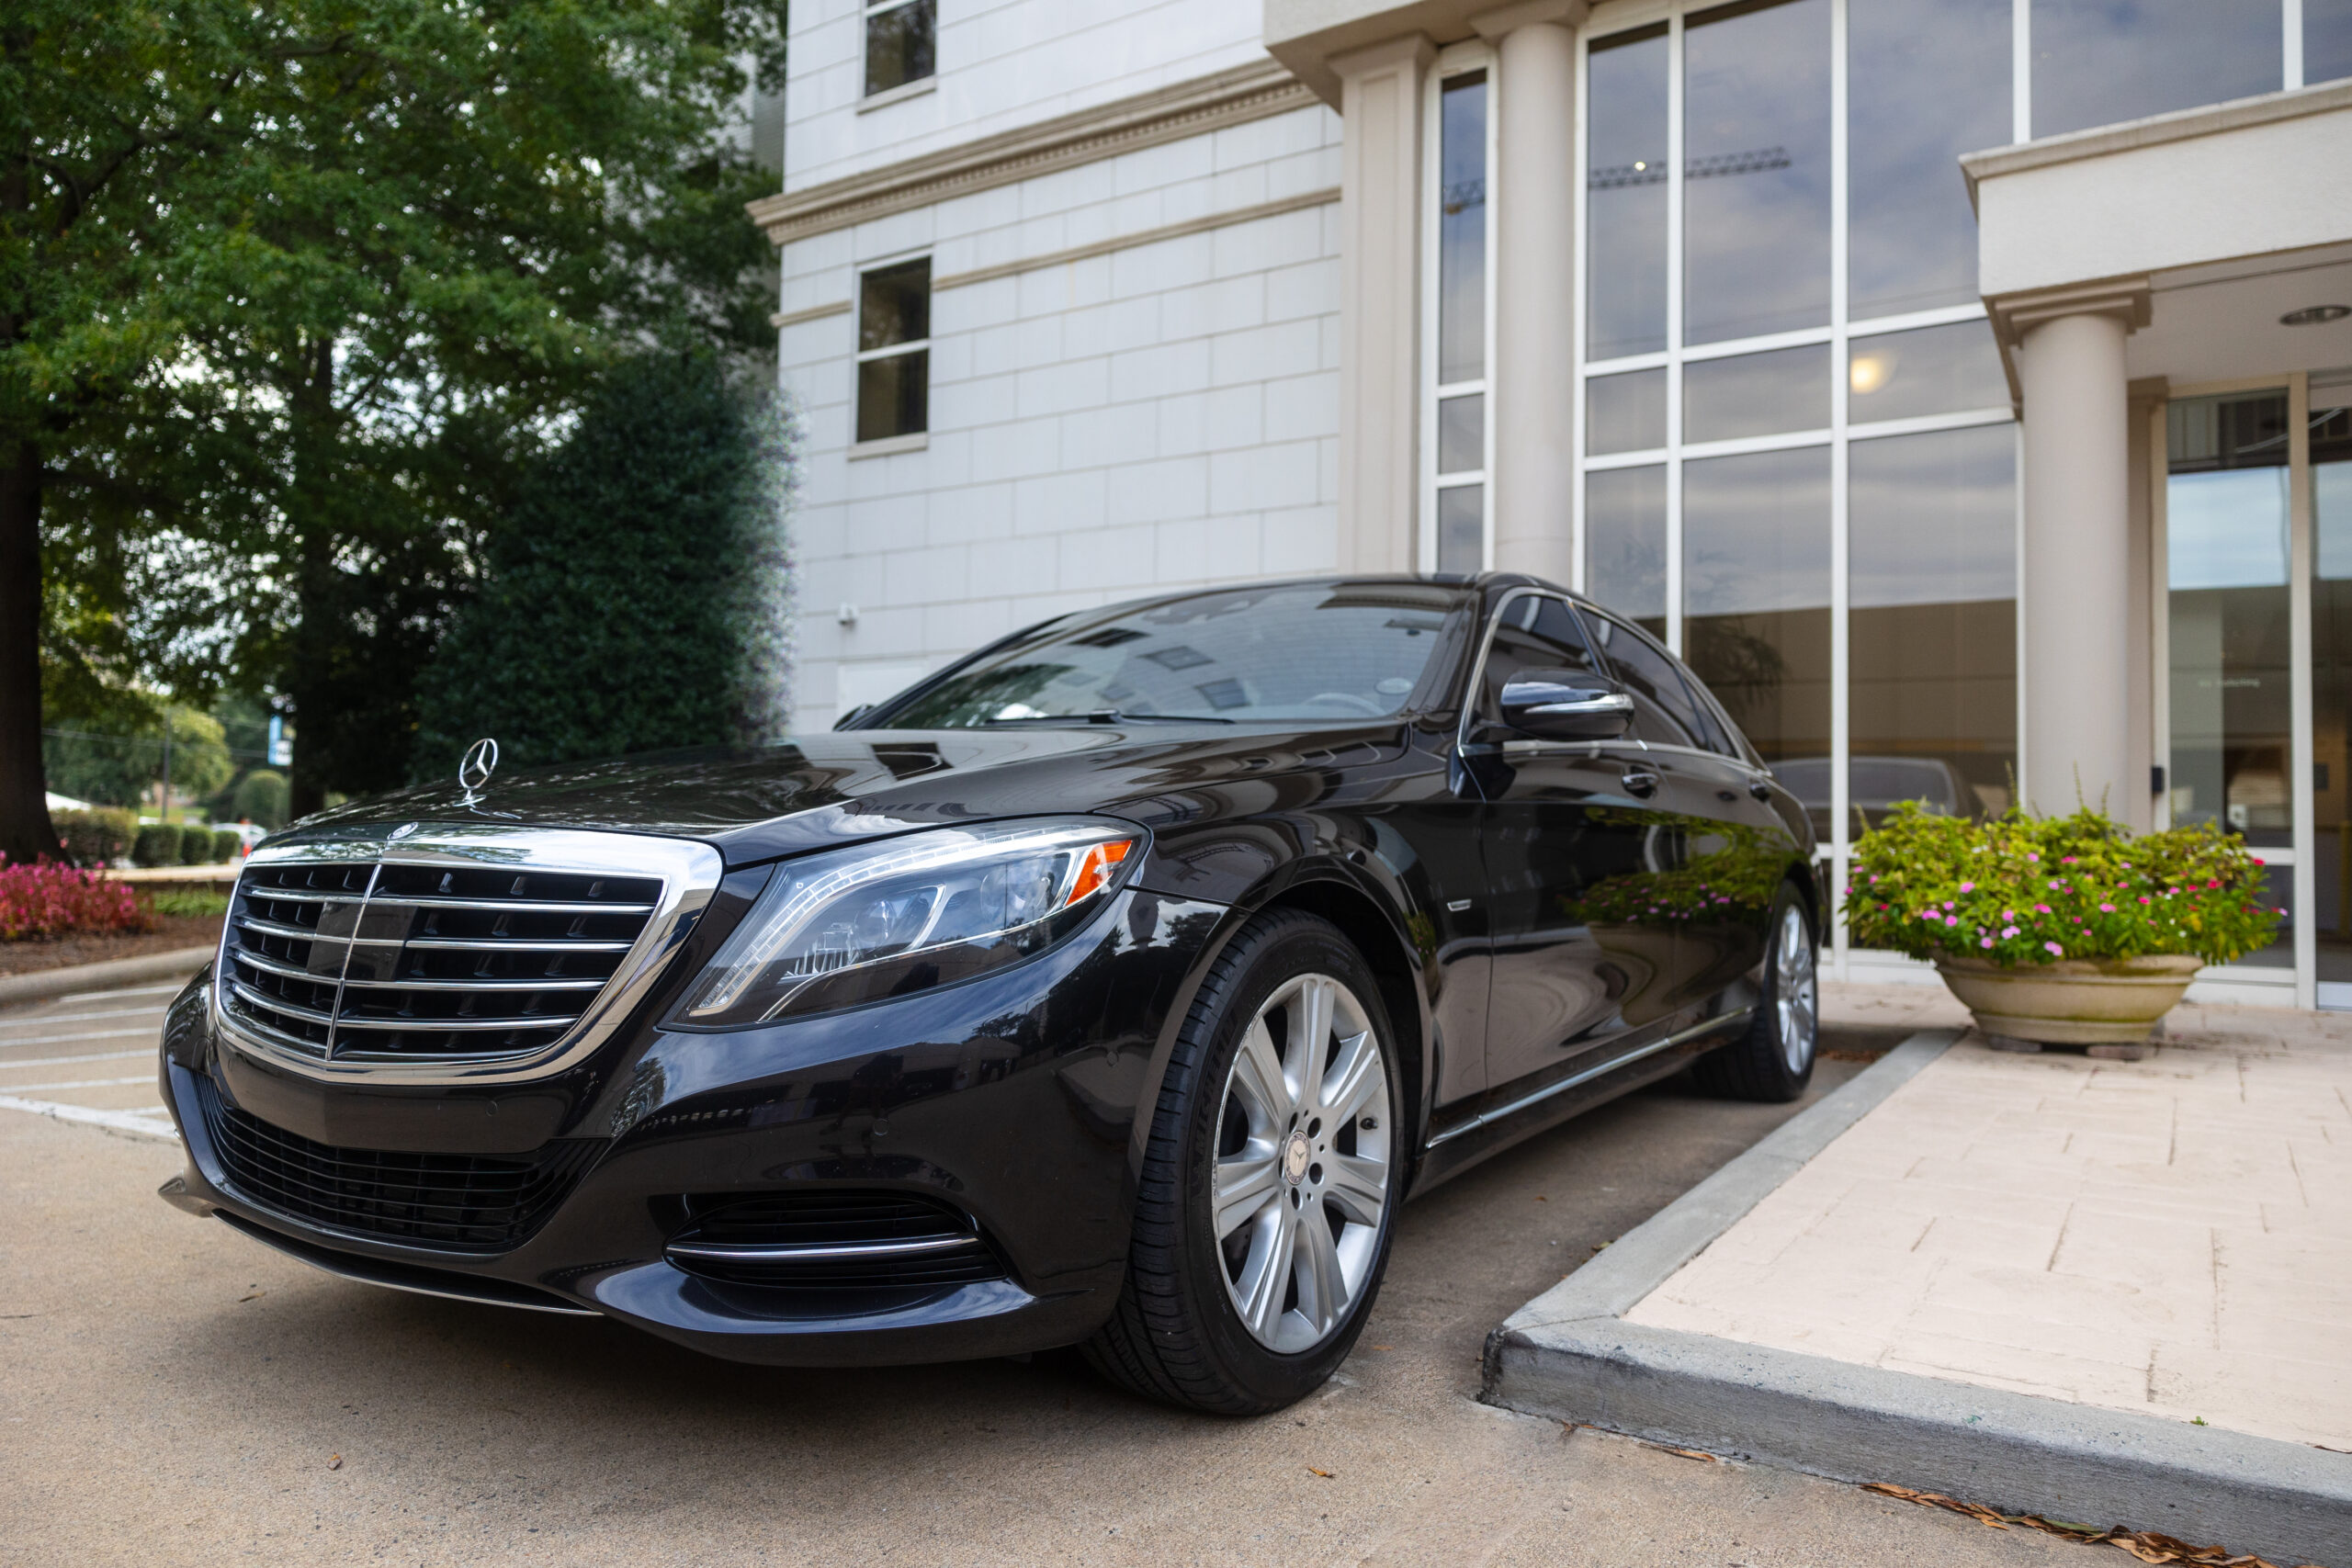 A Peak Mercedes S550 Sedan, waiting to provide the best services for clients.